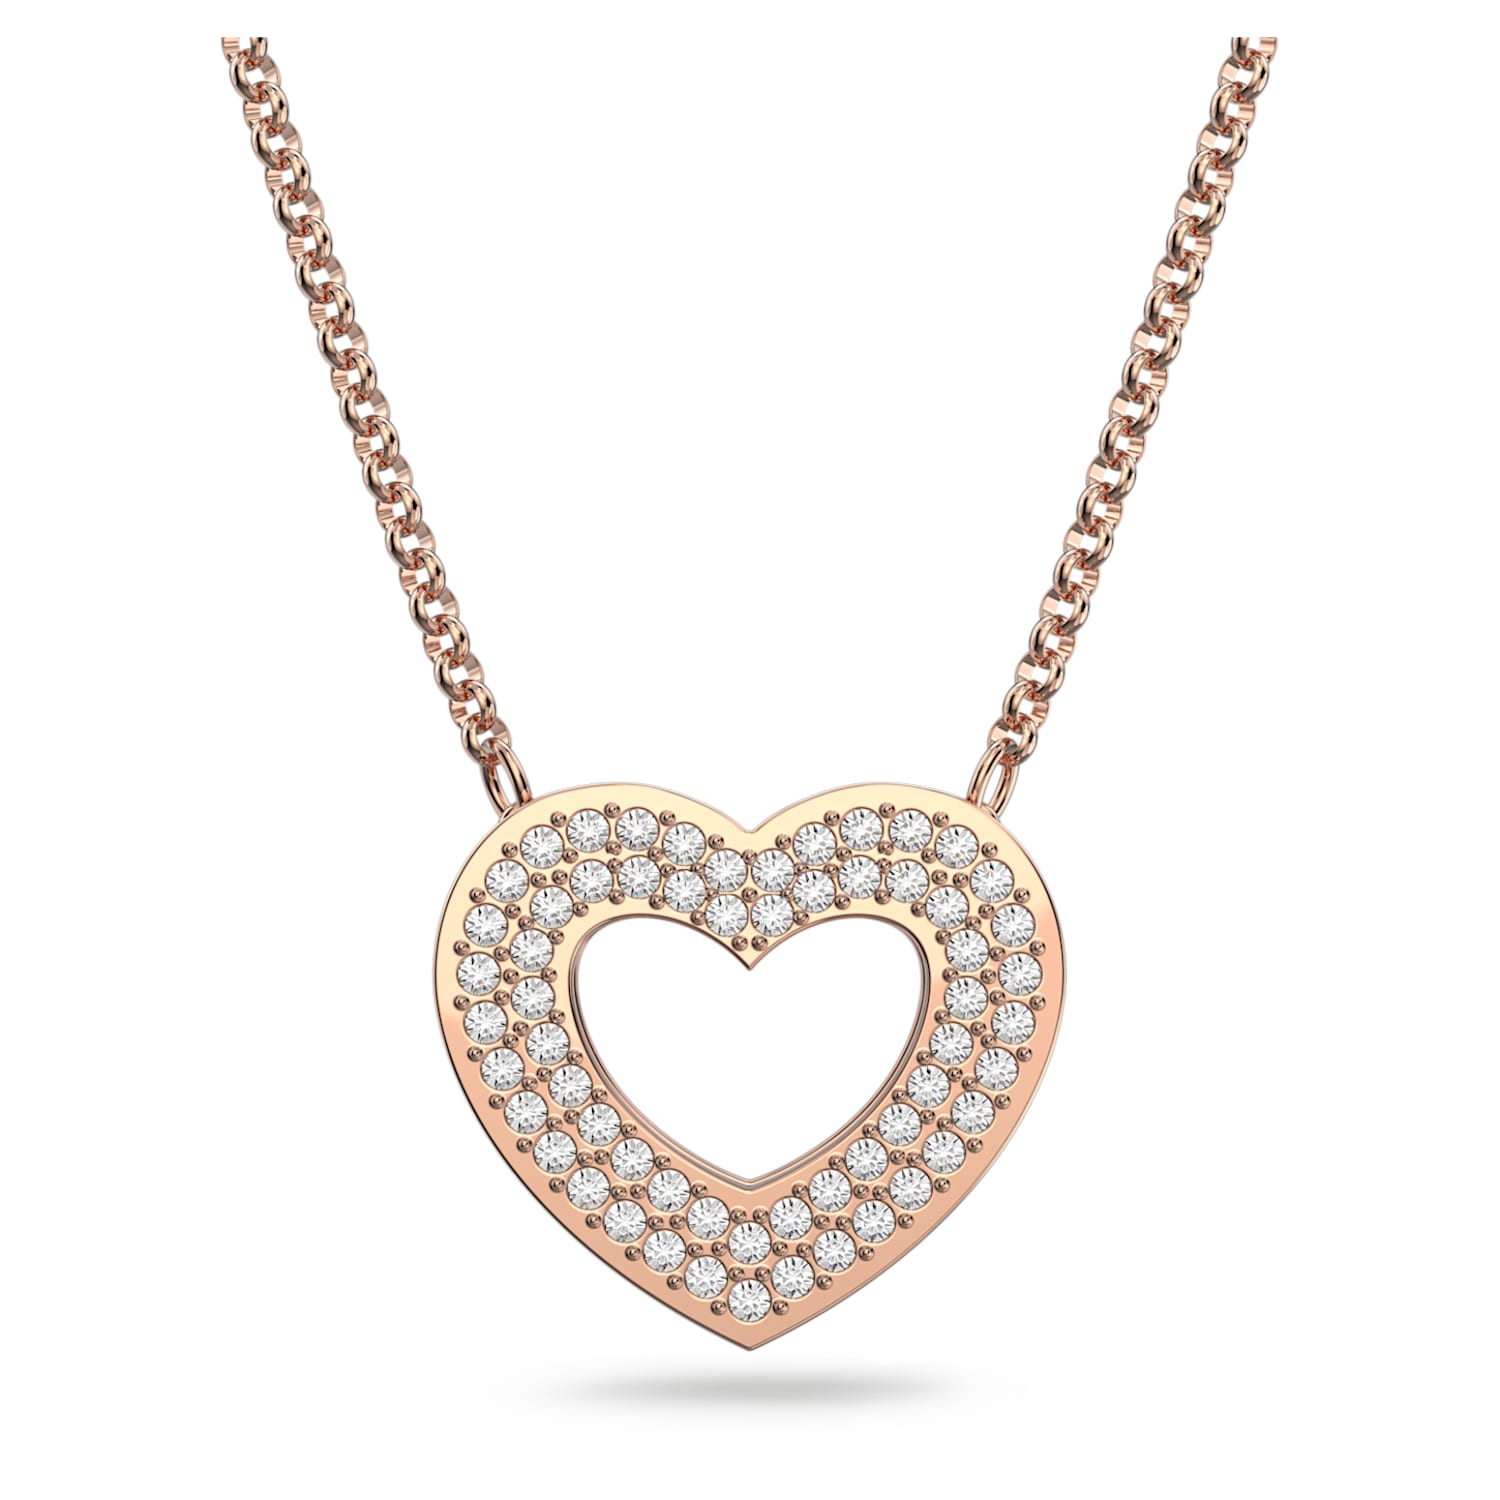 Admiration necklace, Pavé, Heart, White, Rose gold-tone plated 